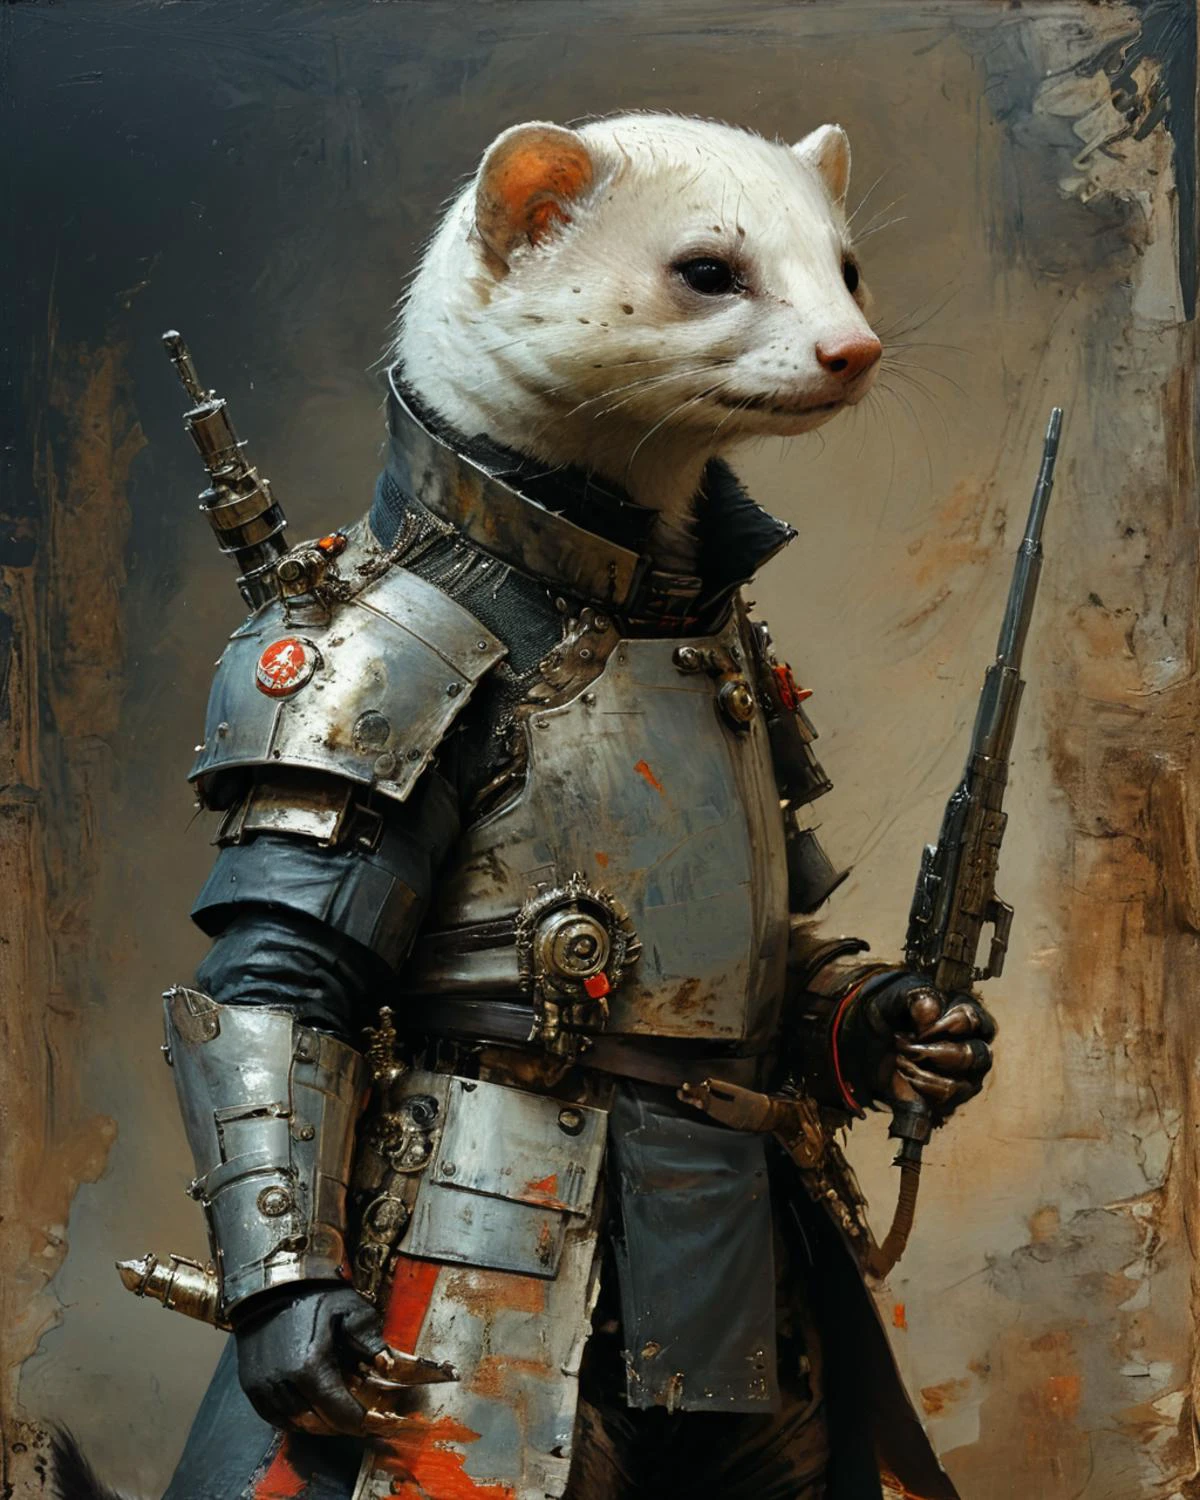 armored and armed anthropomorphic ferret, fenliexl,  in the style of Nicola Samori, John Berkey Style page